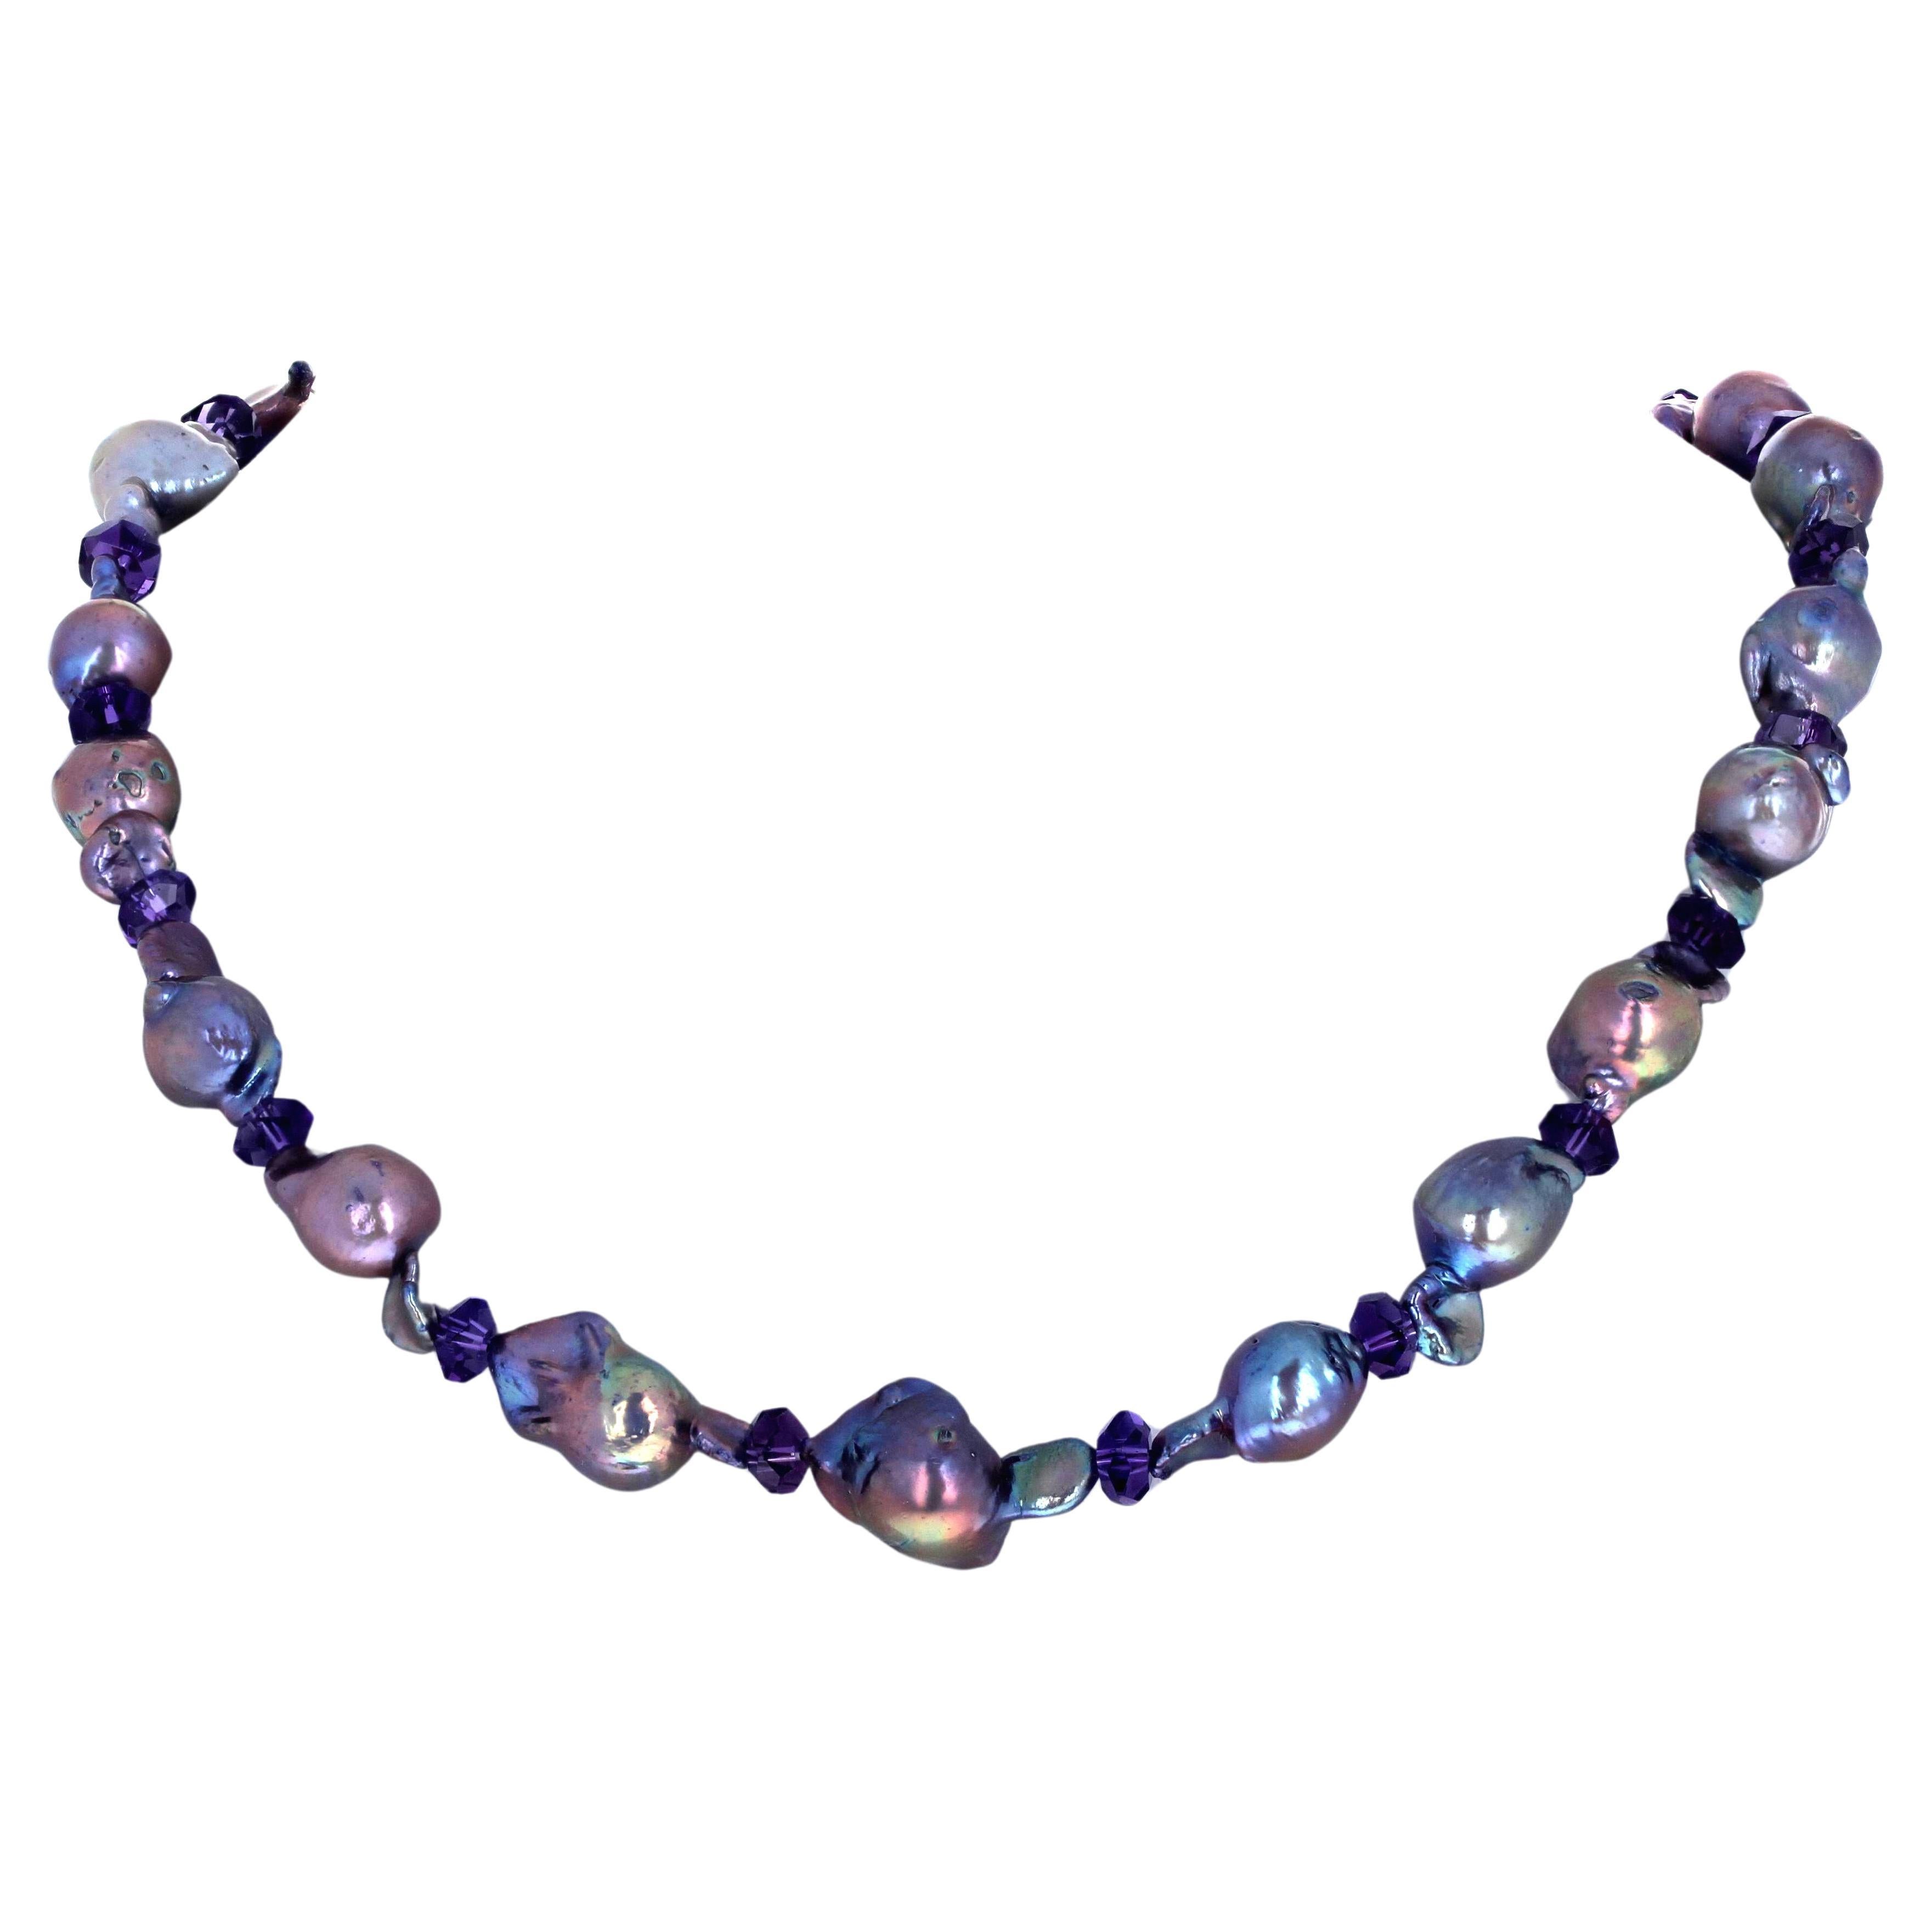 This single strand necklace of real baroque Pearls is 19 inches long.  The largest are approximately 21mm long x 10mm round.  The Pearls are absolutely brilliantly glowingly  enhanced with gem cut real Amethyst gemstone spacers.  The clasp is a